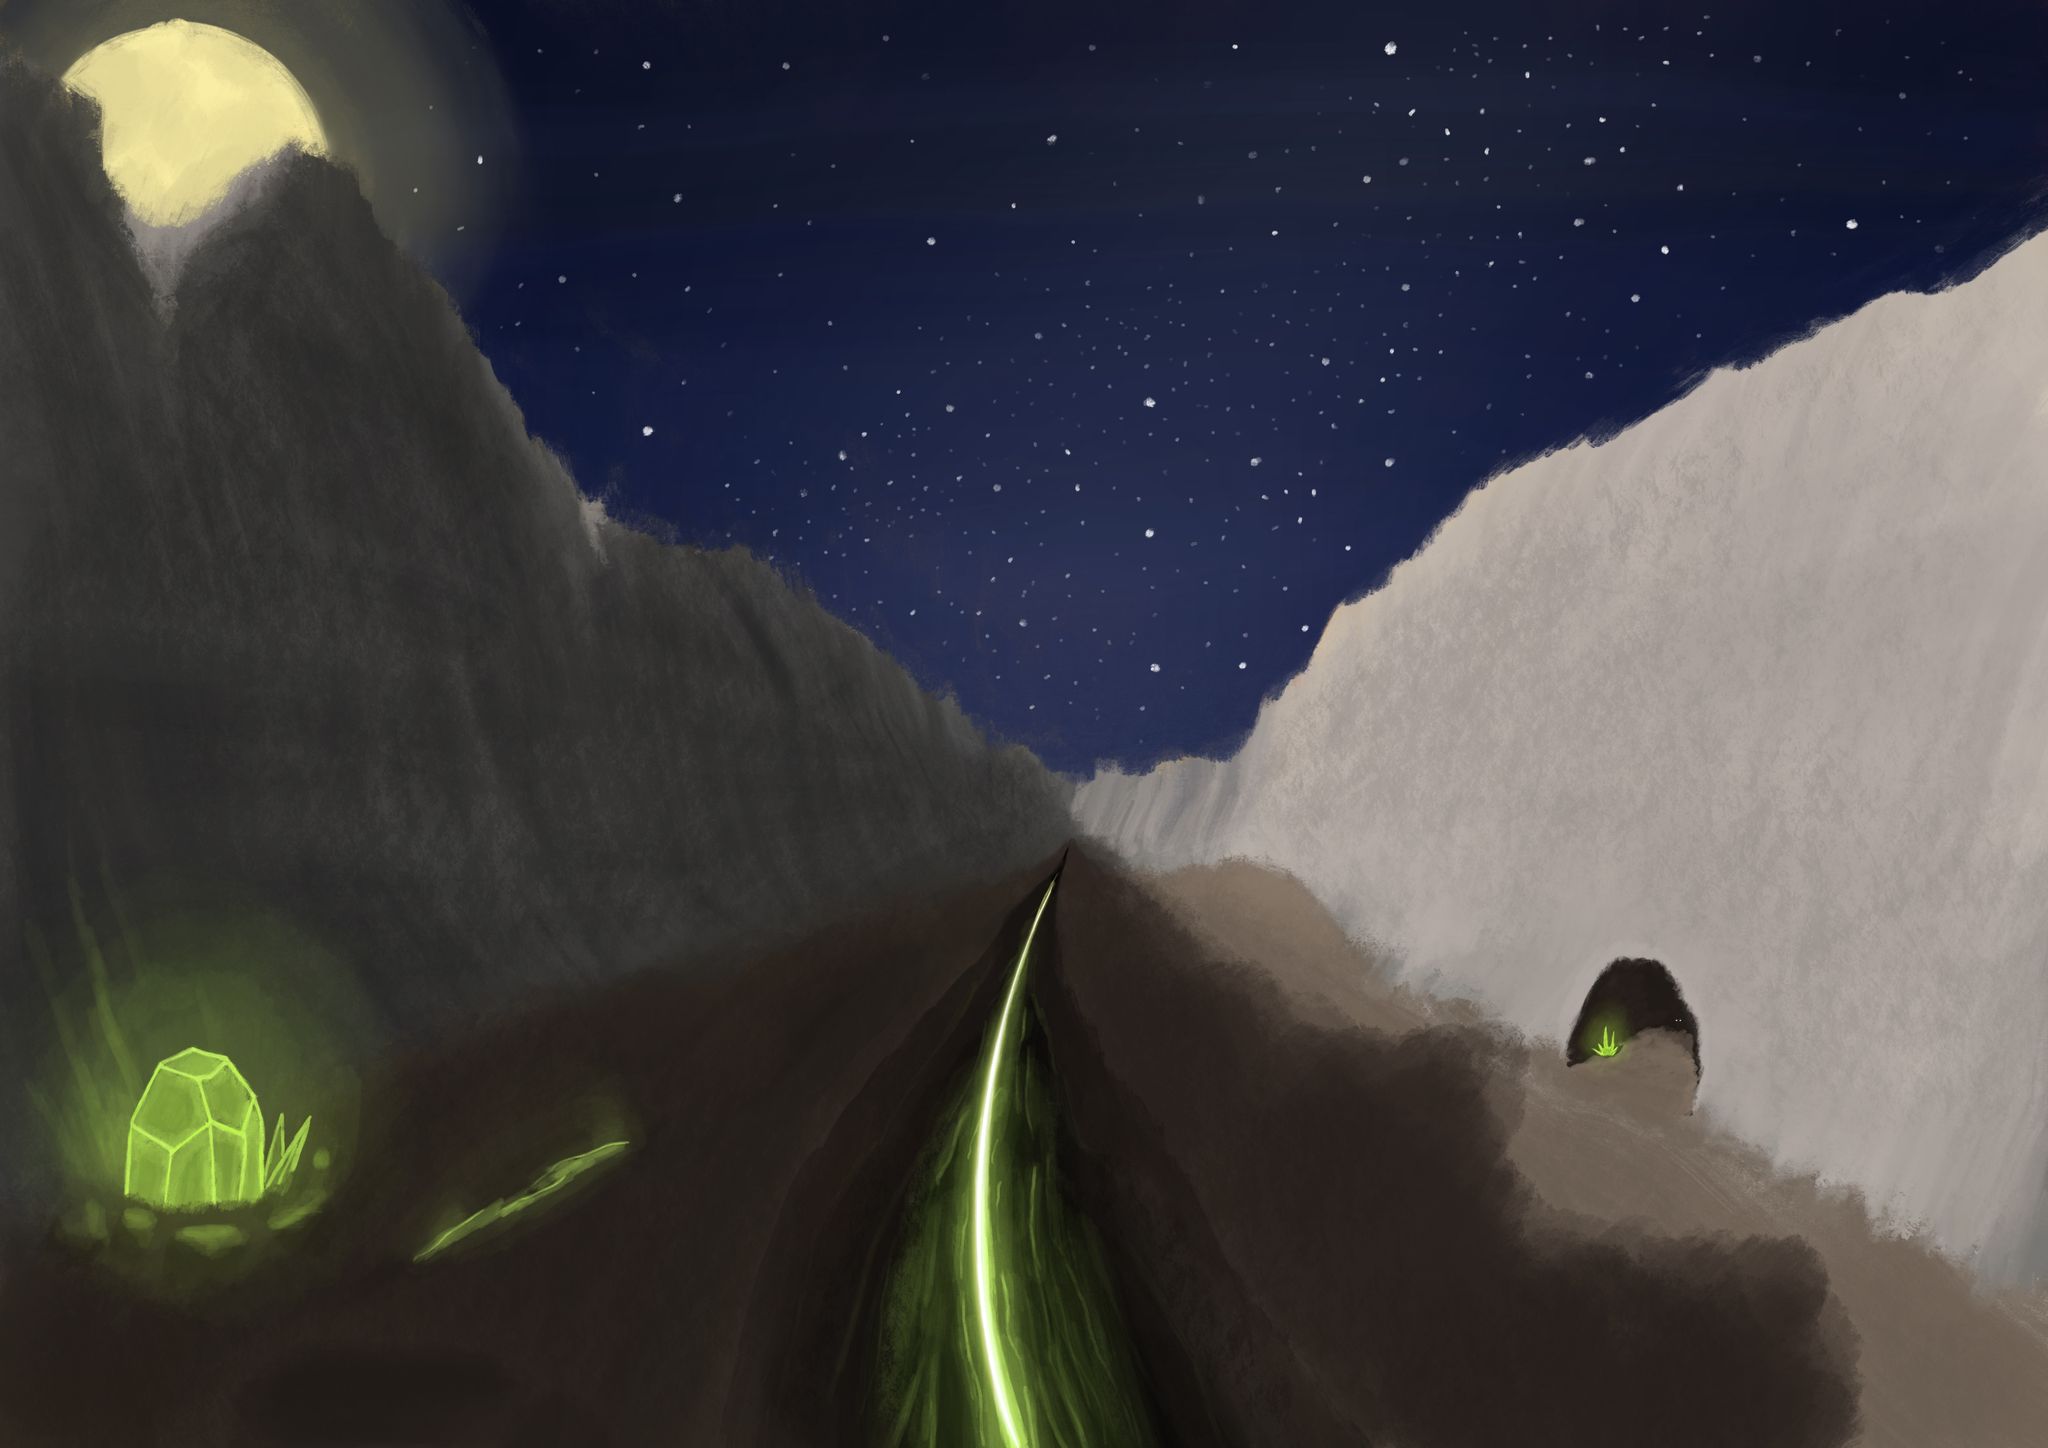 A digital painting looking down a desolate grey rocky valley. A deep black rift runs down the middle with a sickly green glow at the bottom, at the left is a crystal embedded in the ground with the same green glow coming from it. At the right is a cave entrance in the valley wall with another glowing crystal. The sky is awash with stars, and the moon peeks from behind the valley peak at the far left.